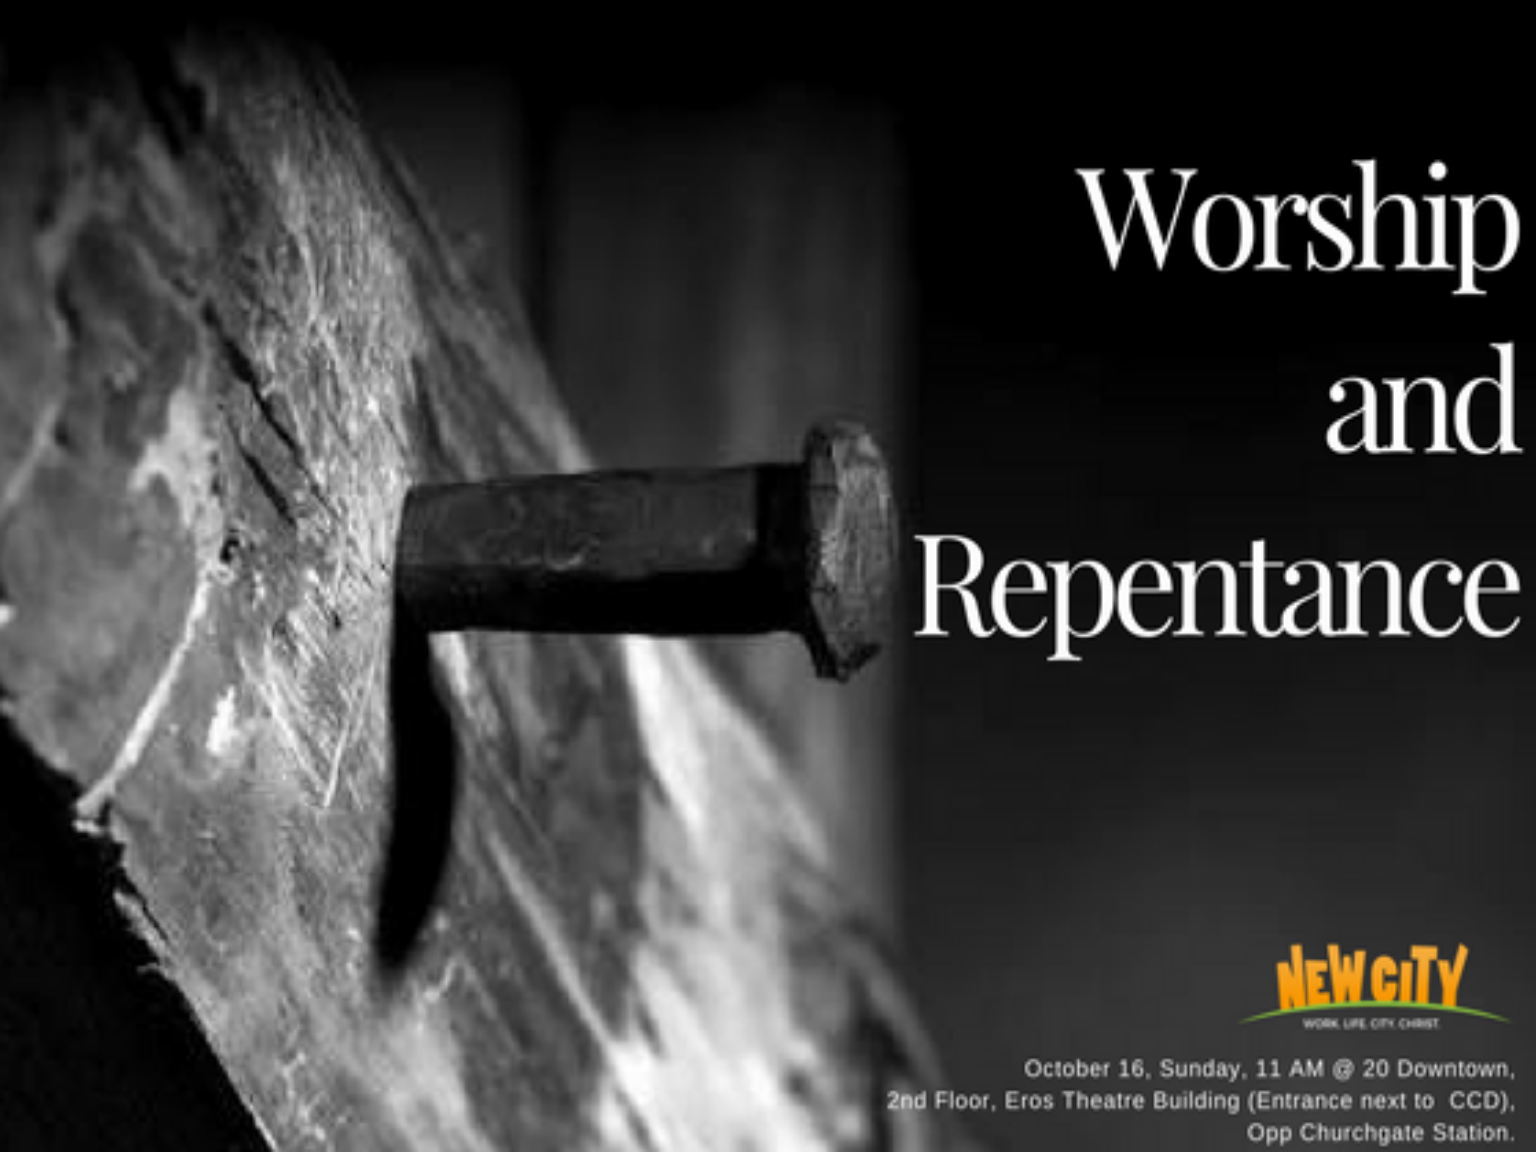 Worship and Repentance